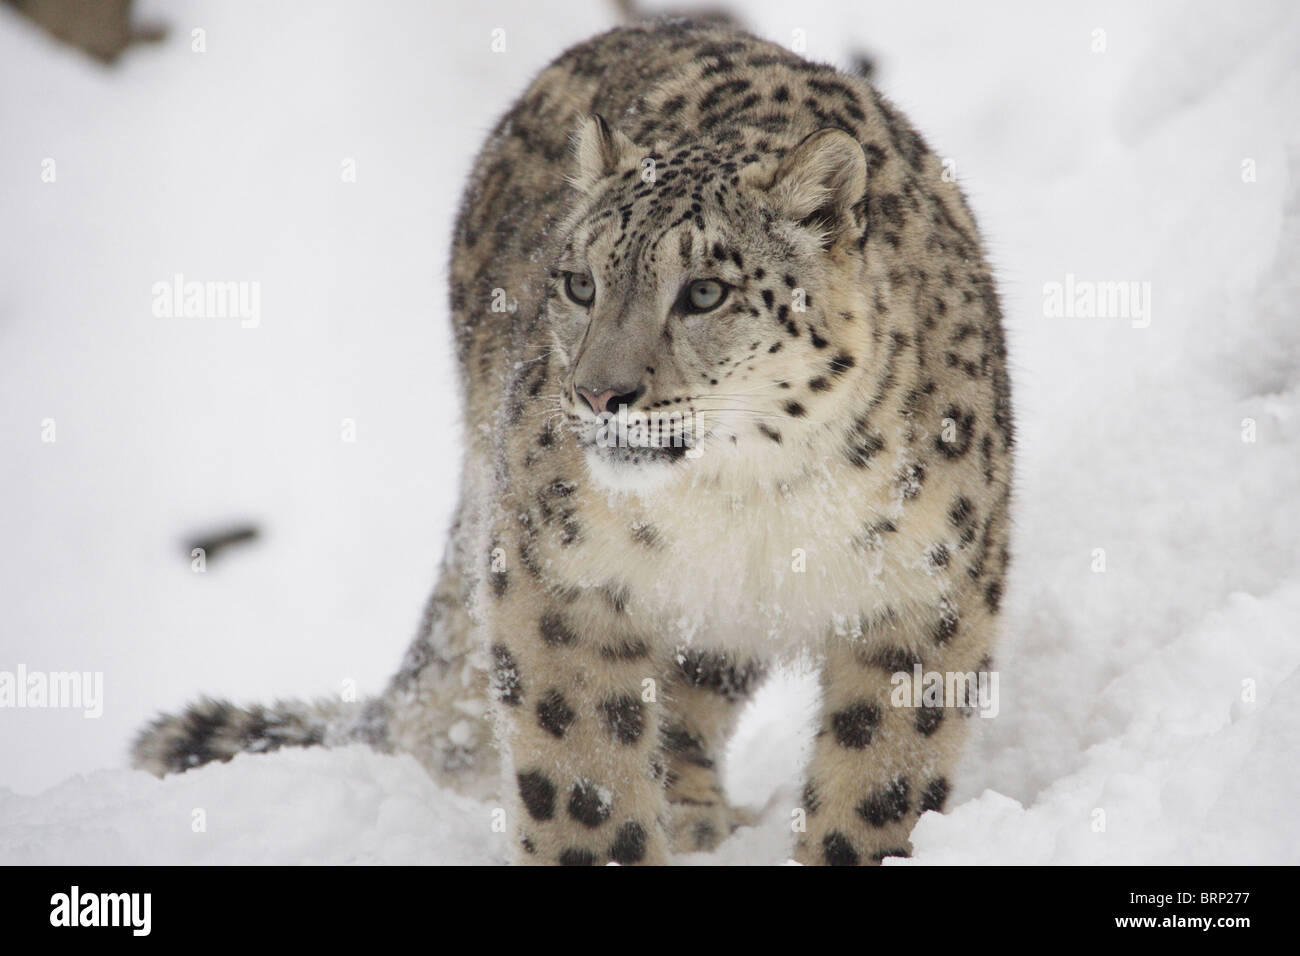 Snow Leopard standing in snow Stock Photo